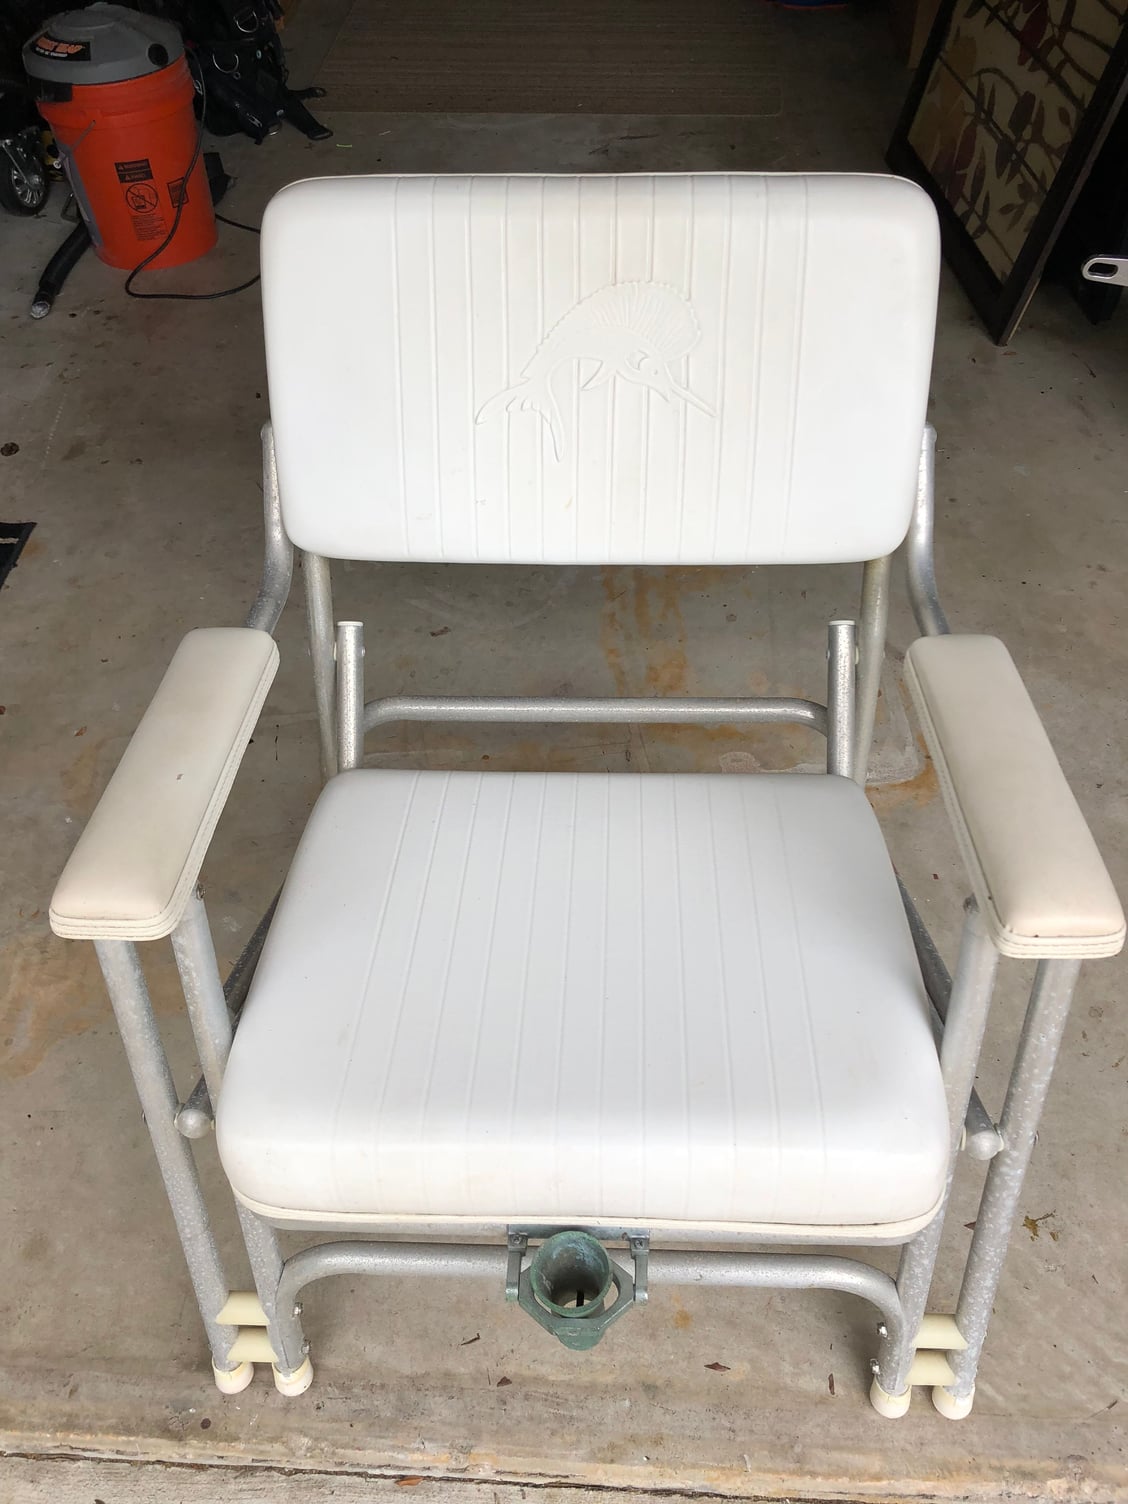 Garelick EZ-IN fighting deck chair $50. Sold. - The Hull Truth - Boating  and Fishing Forum